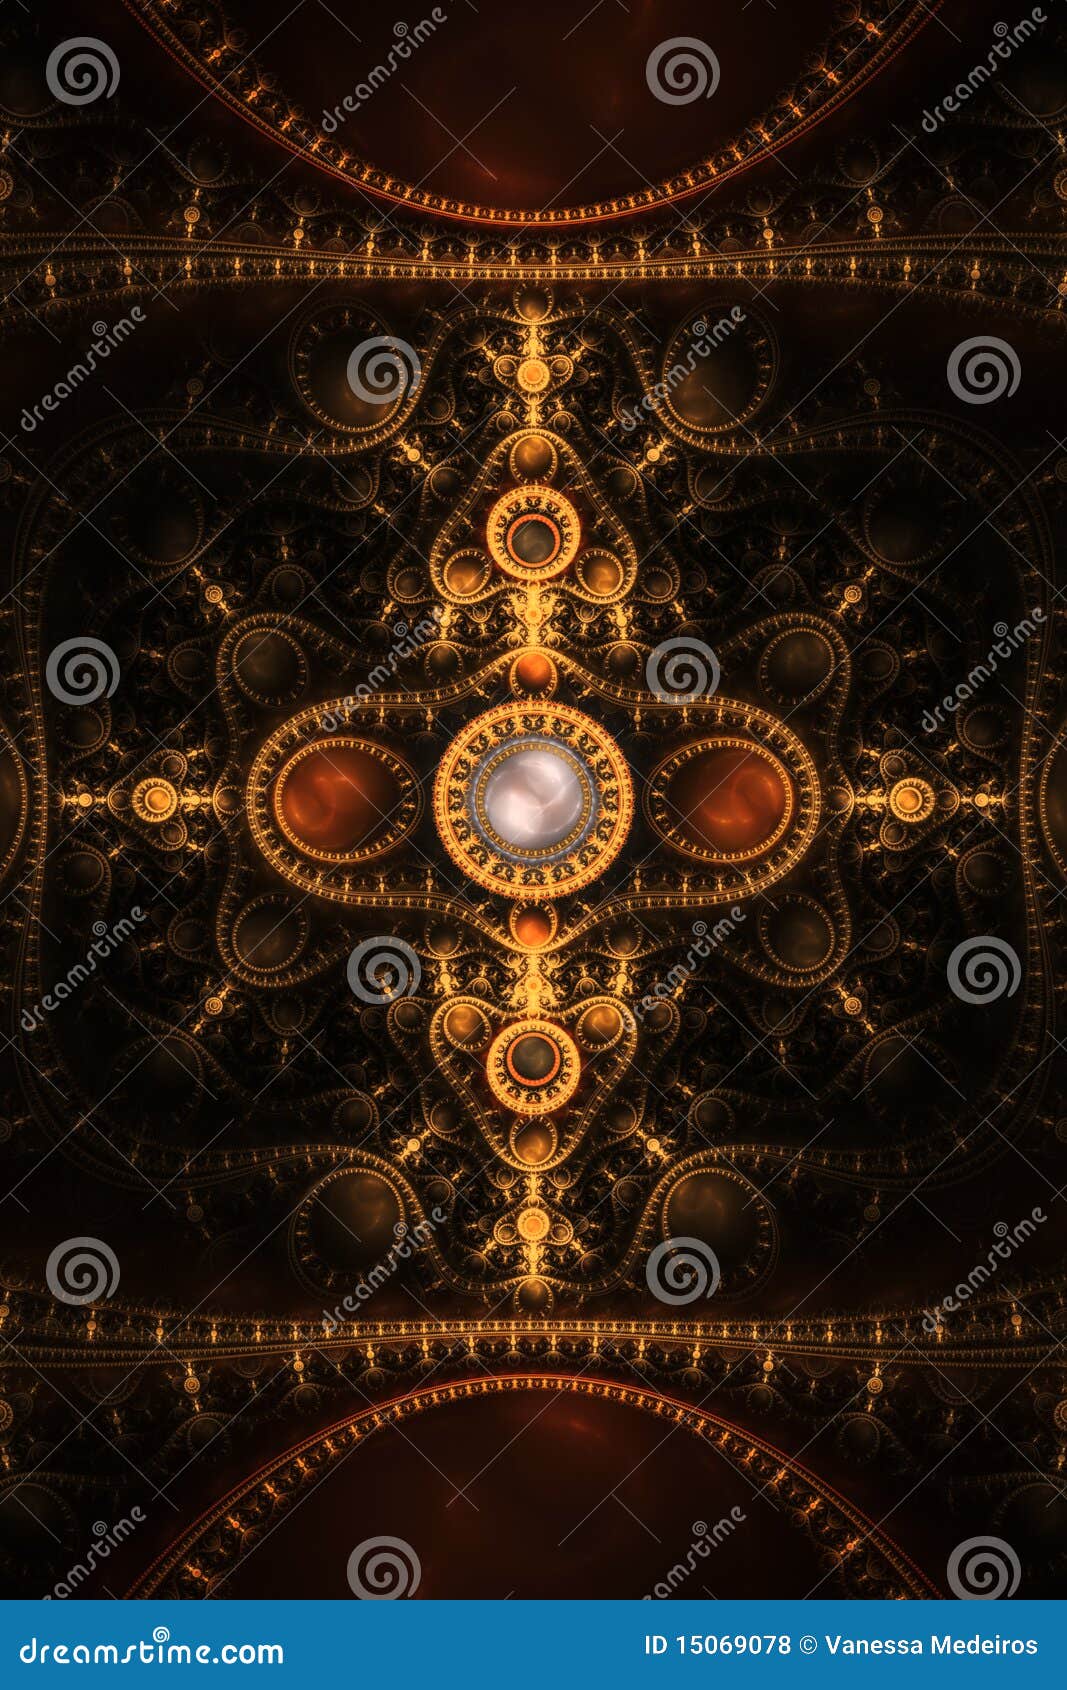 abstract clock jewel fractal flame background